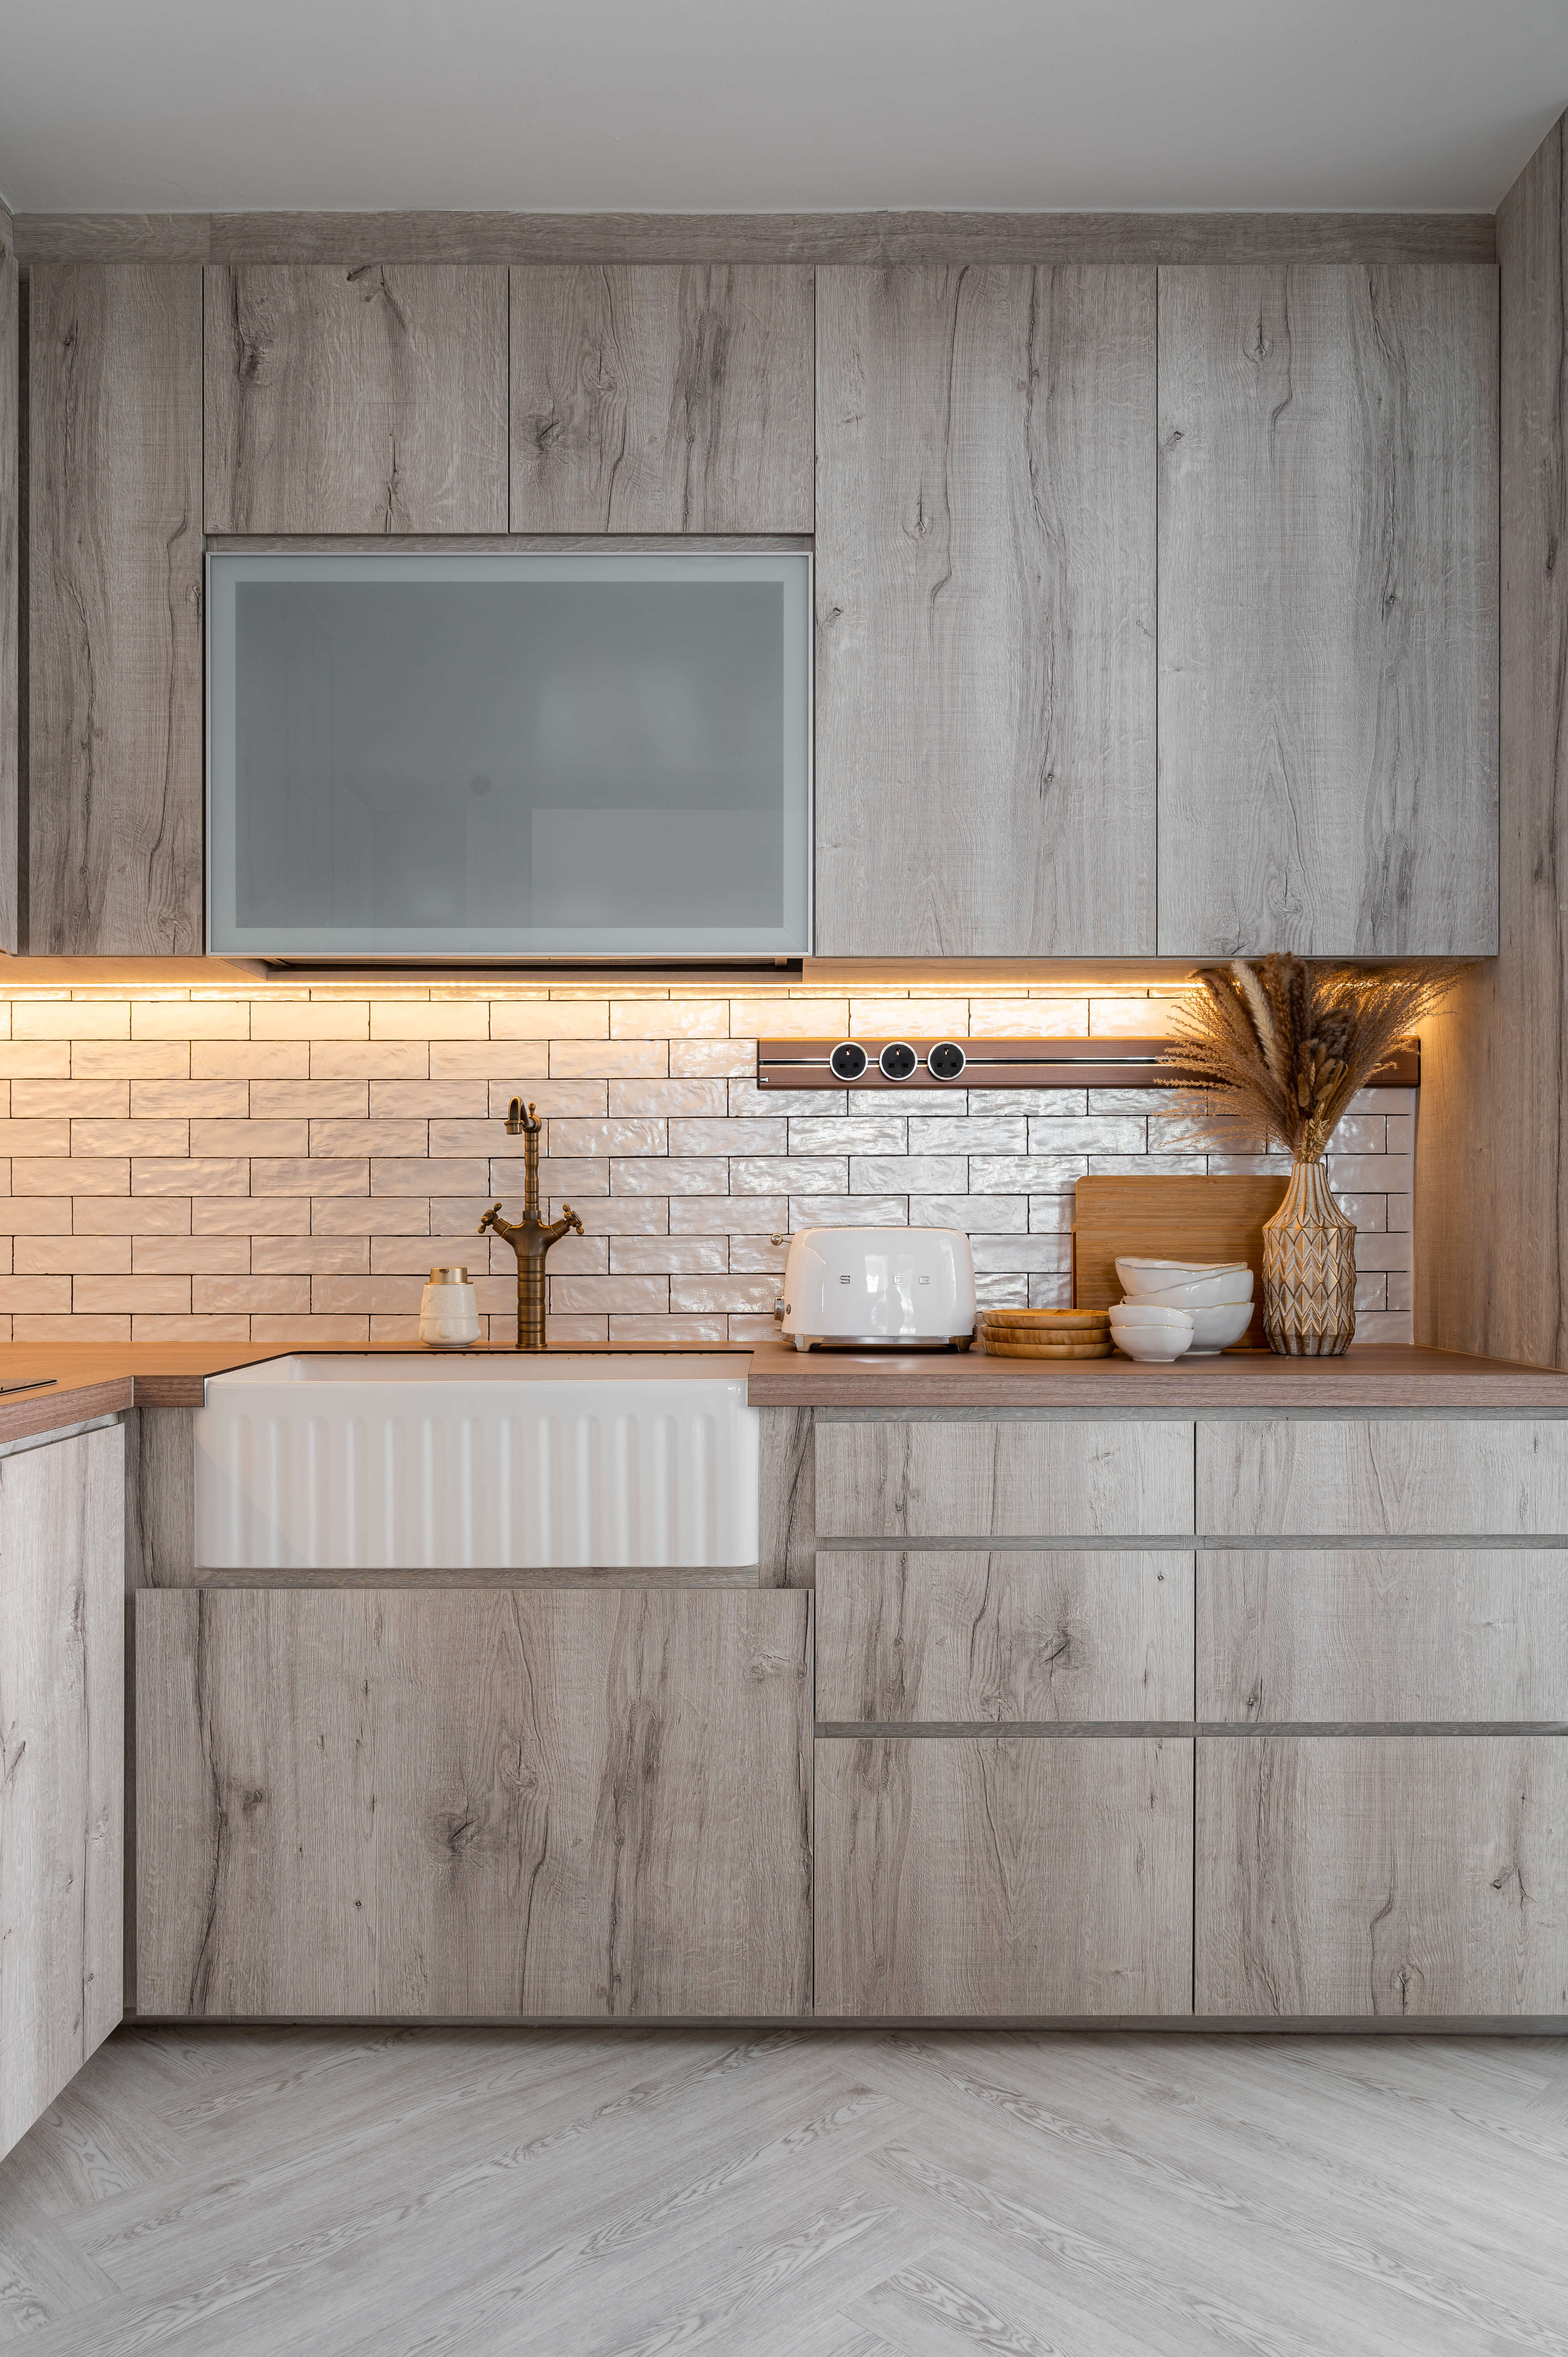 Modern Rustic Kitchen with Wood Cabinets, White Countertops and Tiled Wall